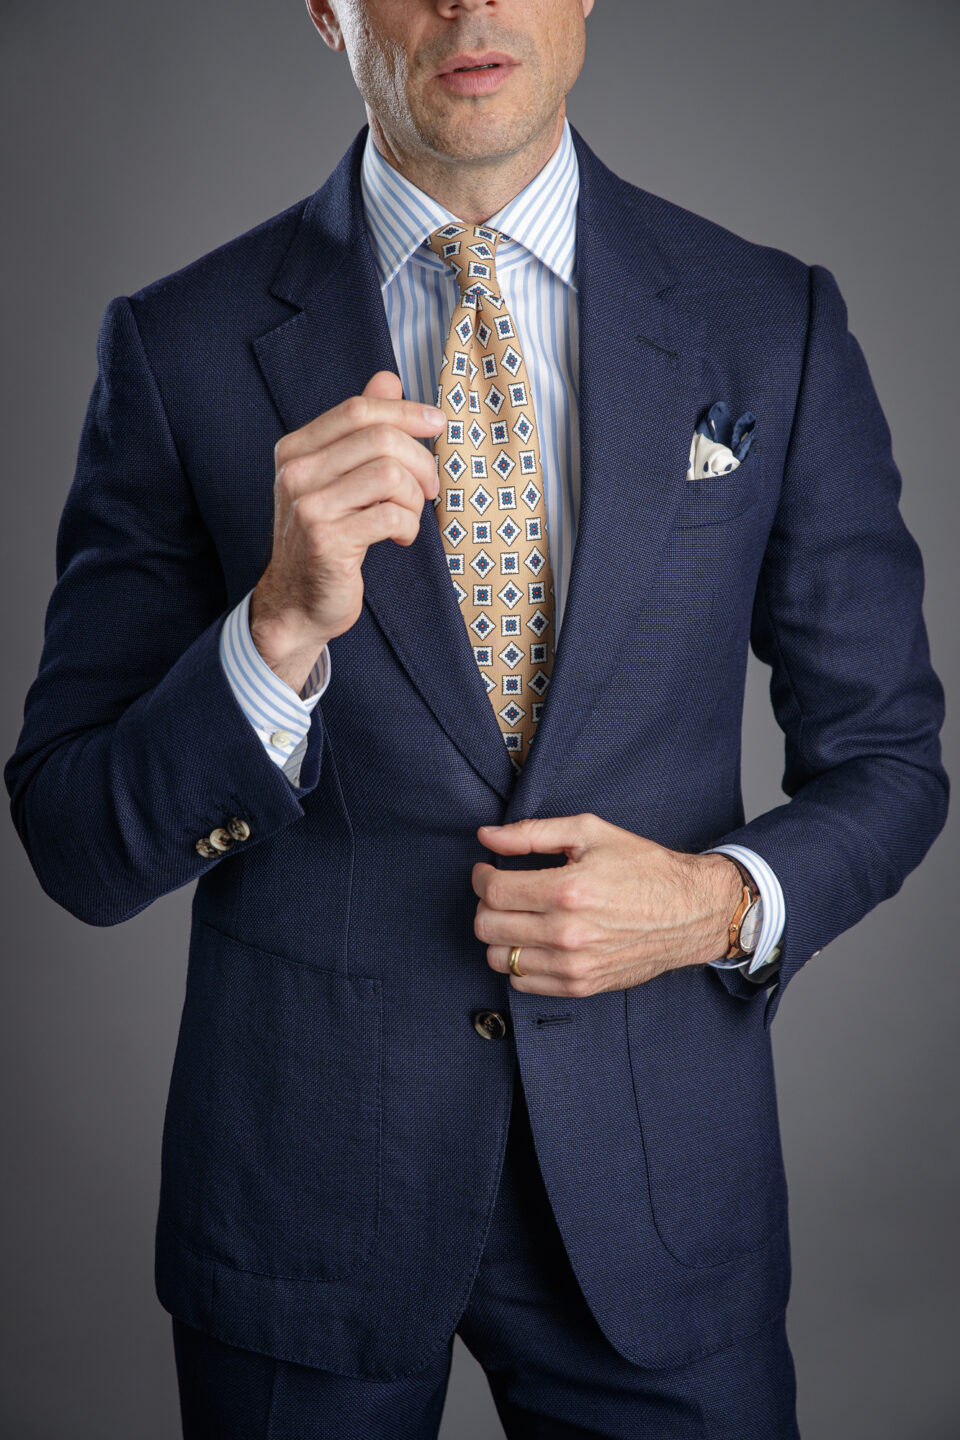 https://hespokestyle.com/wp-content/uploads/2020/09/navy-hopsack-suit-with-striped-shirt-medallion-tie-business-outfit-ideas-mens-he-spoke-style-michael-andrews-bespoke-custom-made-to-measure-suits-online-960x1440.jpg